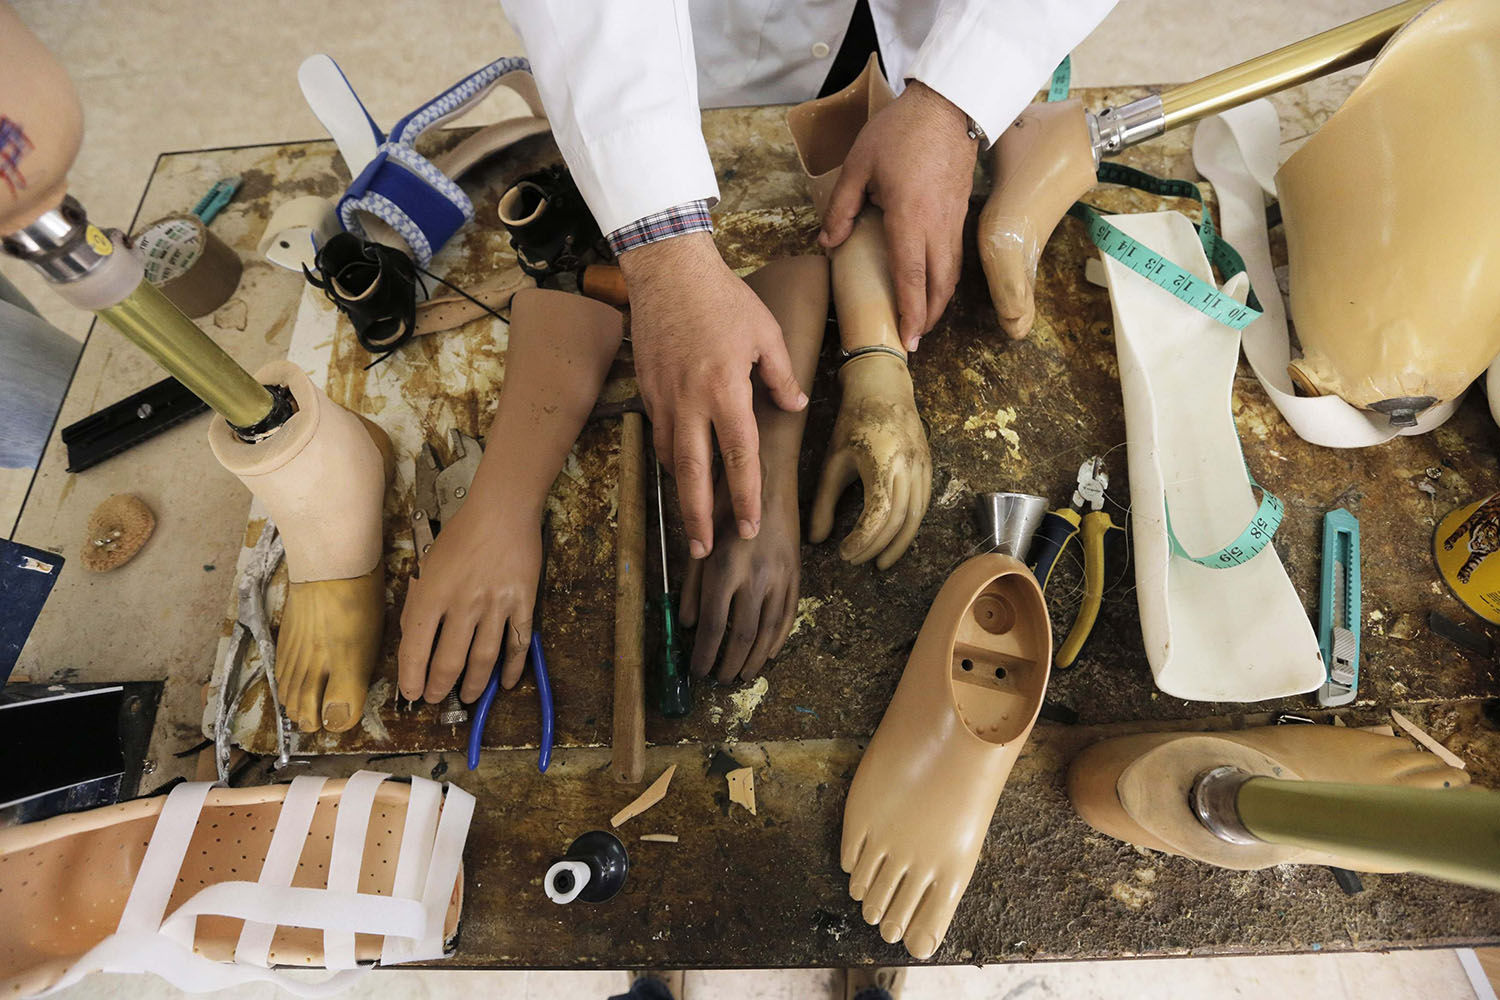 Mar. 4, 2014. A Palestinian technician works at a small factory that produces artificial limbs in the West Bank town of Qalqilya.